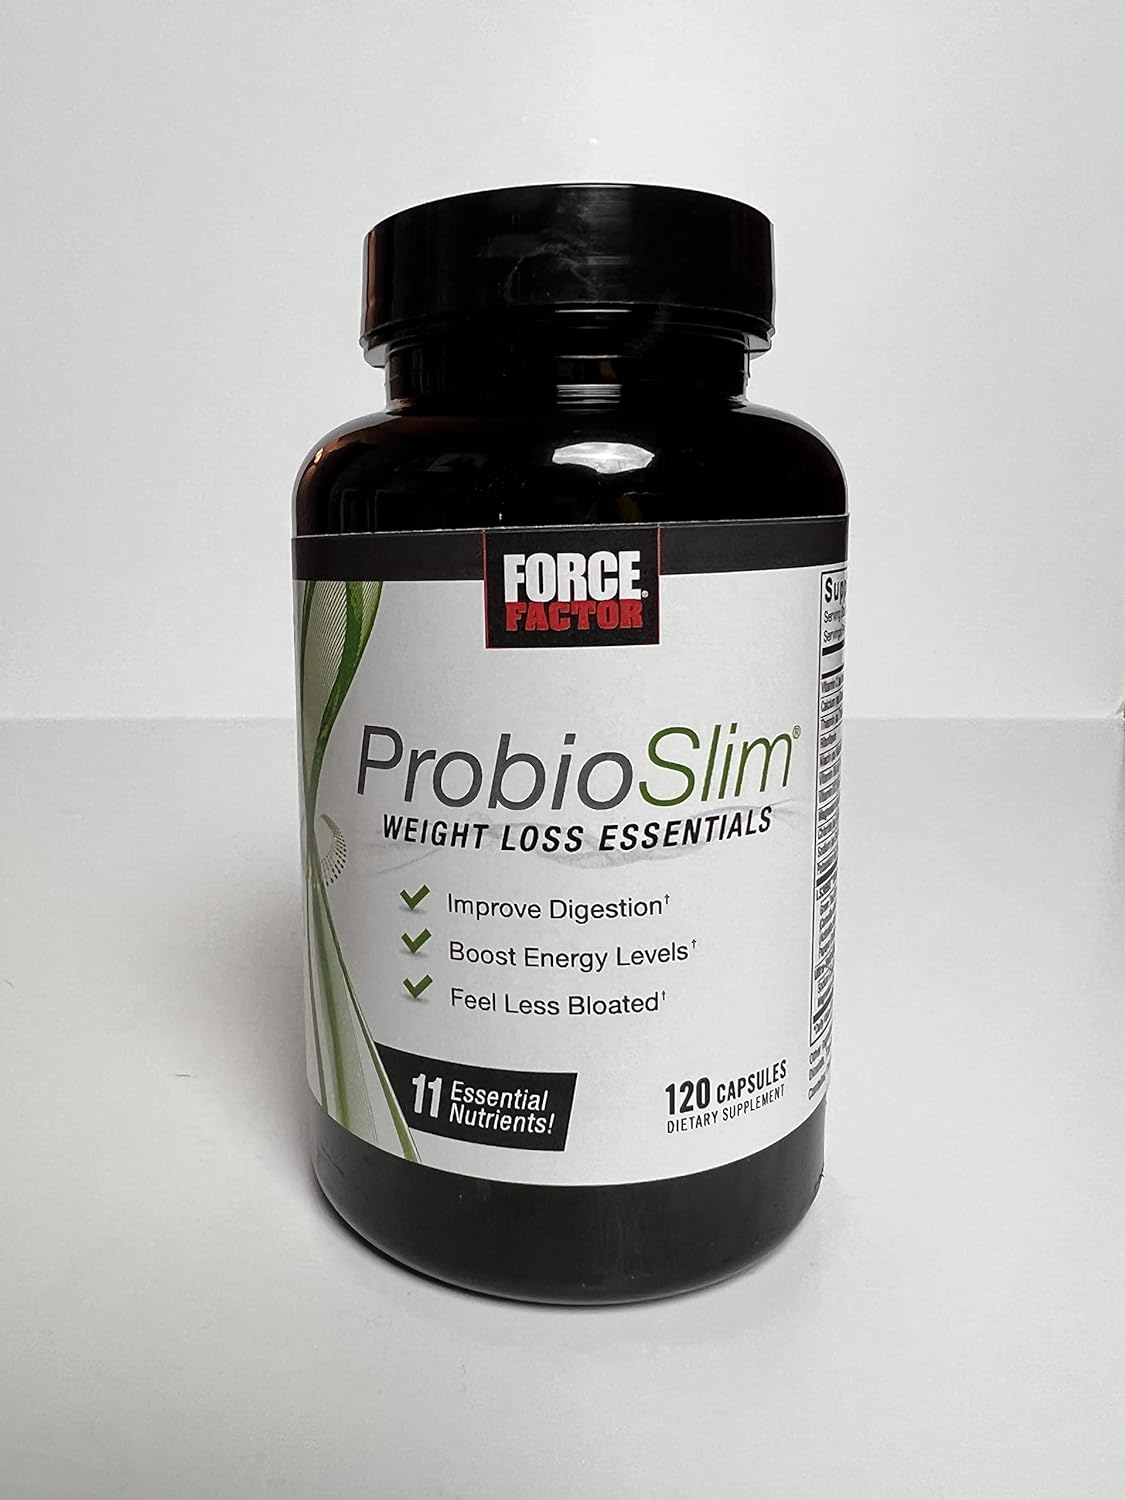 FORCE FACTOR ProbioSlim Weight Loss Essentials Complete Daily Digestive Health and Weight Loss Probiotic Supplement for Women and Men with Electrolytes and Green Tea Extract, 120 Capsules